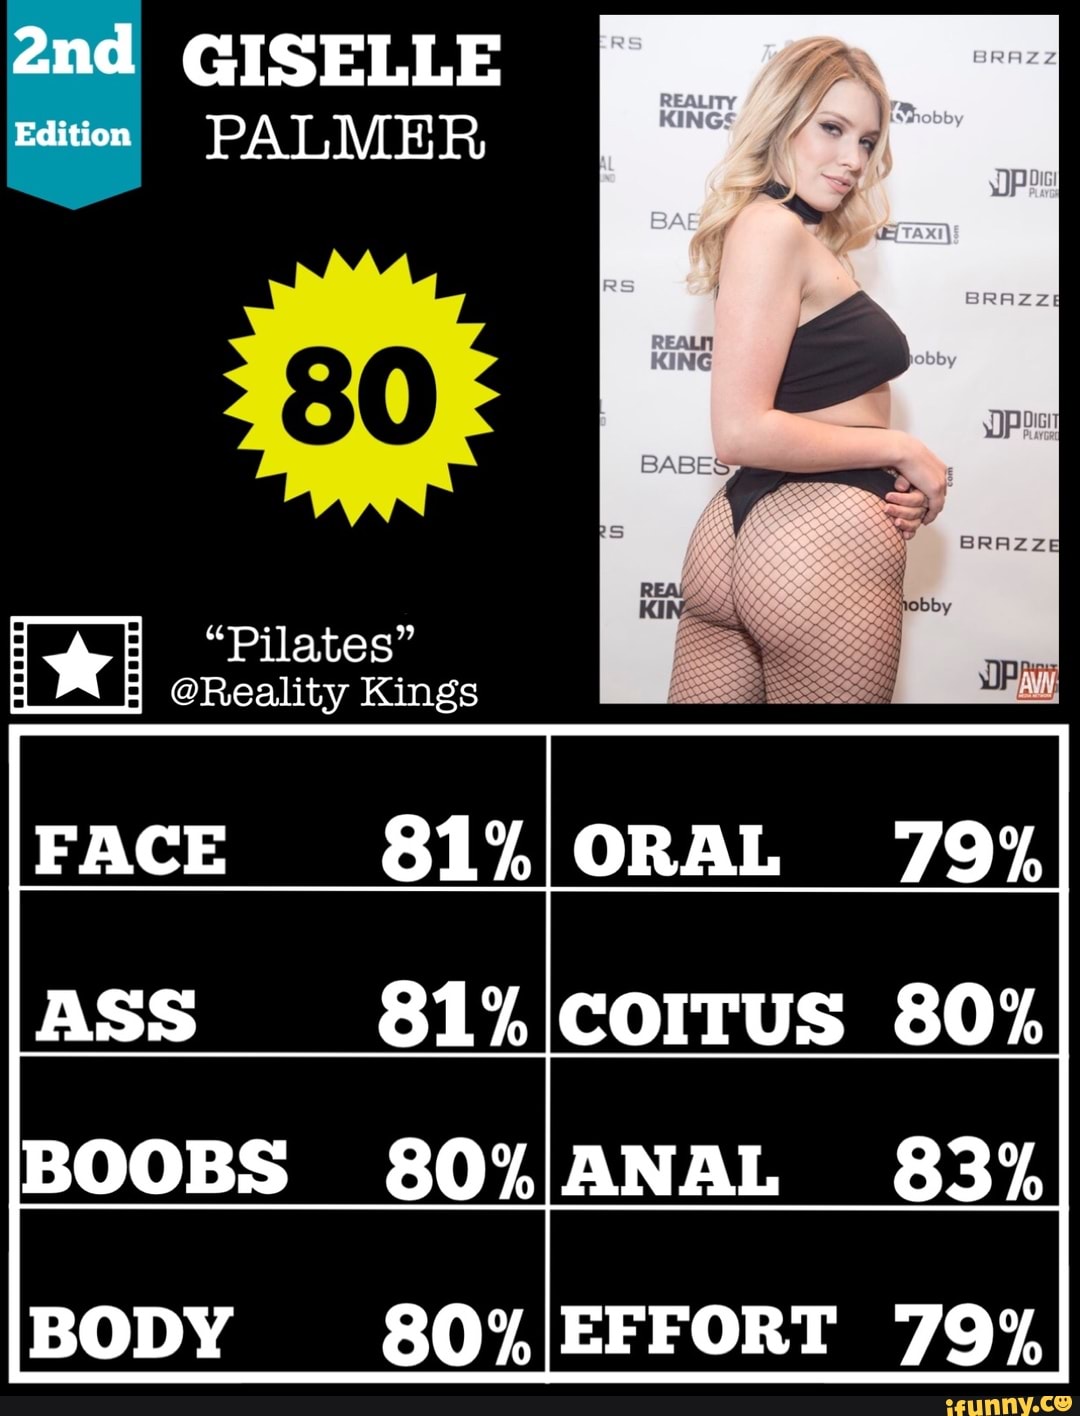 2nd Giselle Editio Palmer Face 81 Oral 79 Coitus 80 Boobs 80 Anal Body 80 Effort 79 Ifunny